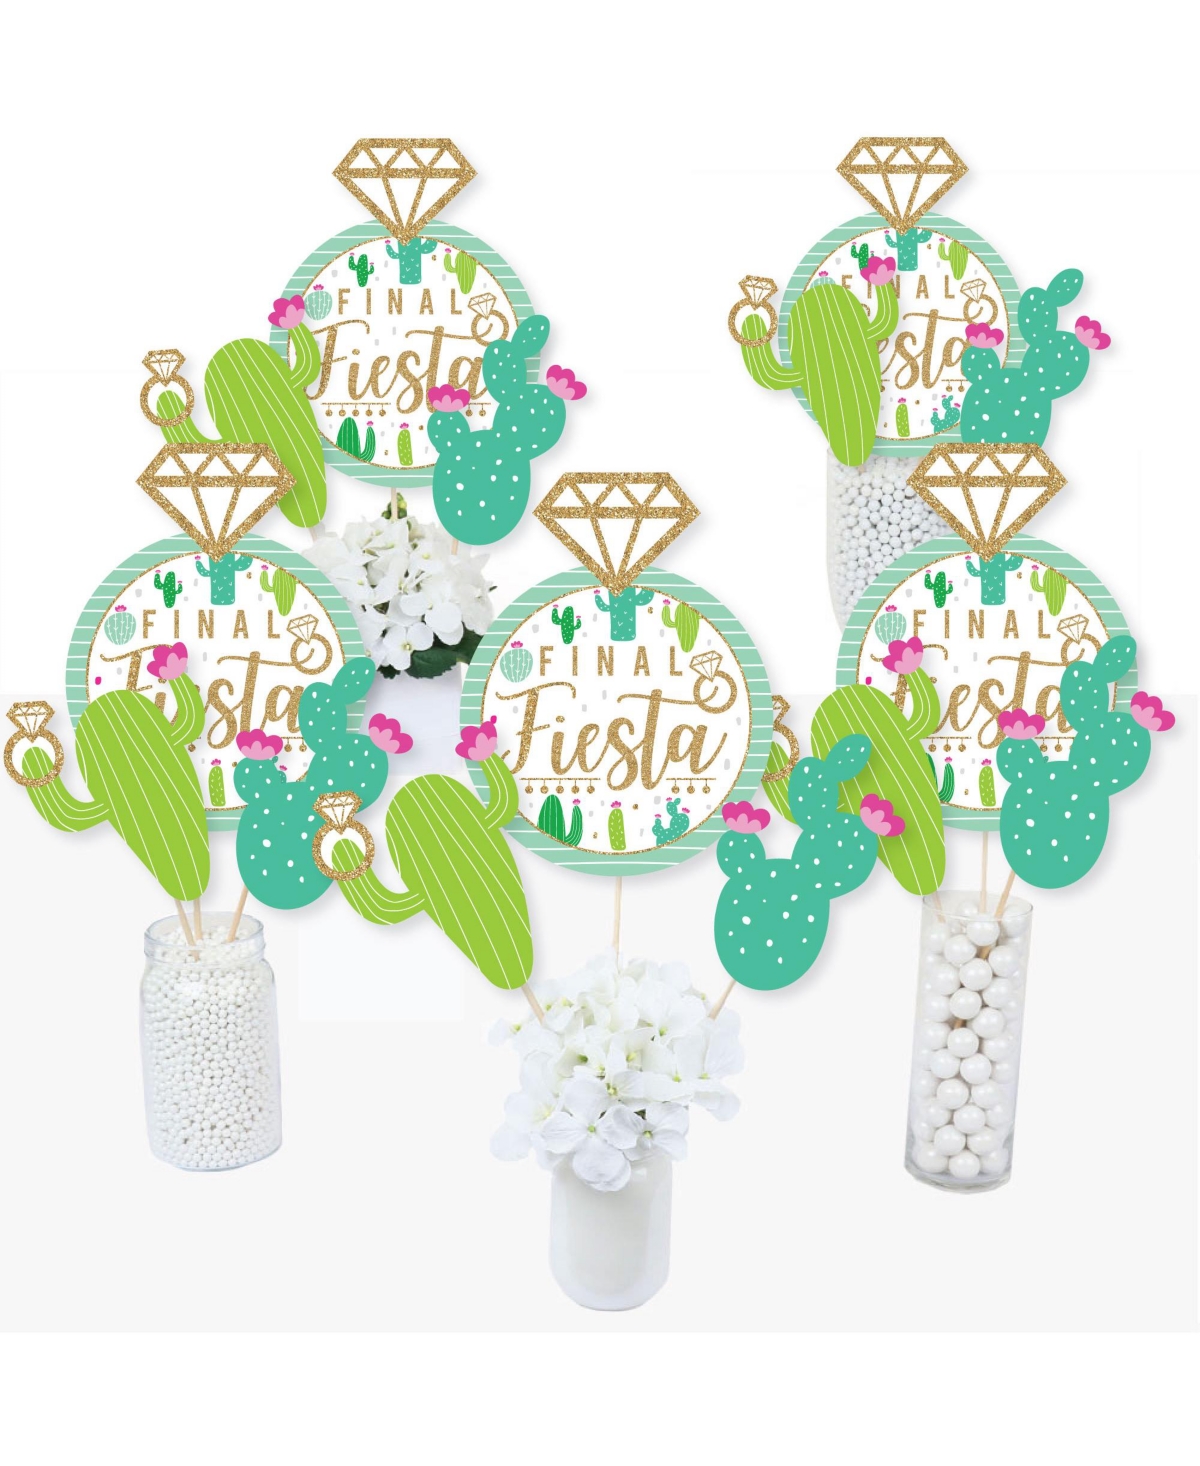 Final Fiesta Bachelorette Party Sticks - Table Toppers 15 Ct